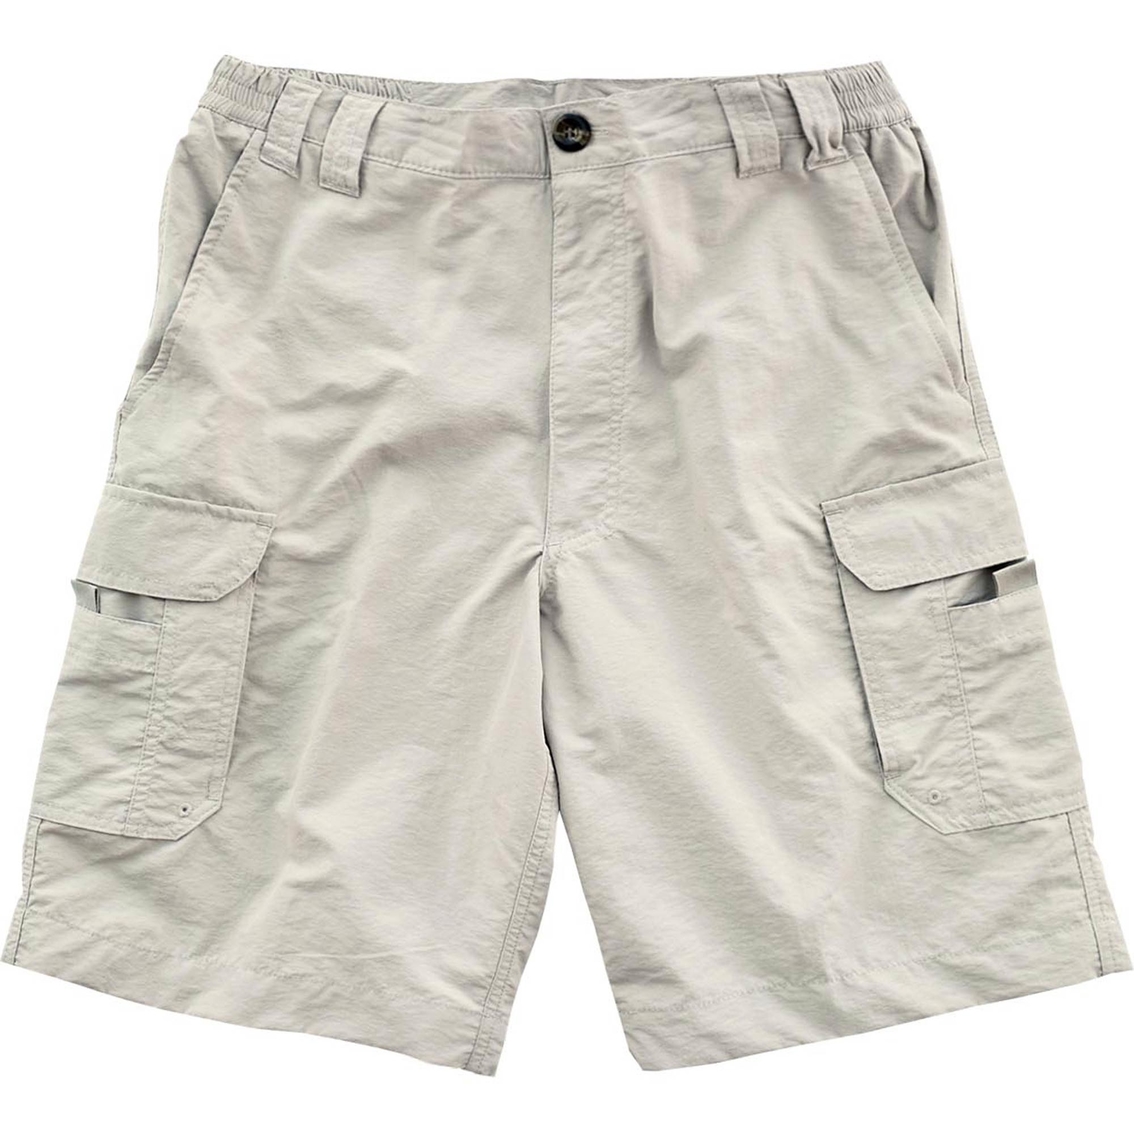 Joe Marlin Clearwater Cargo Shorts | Shorts | Clothing & Accessories ...